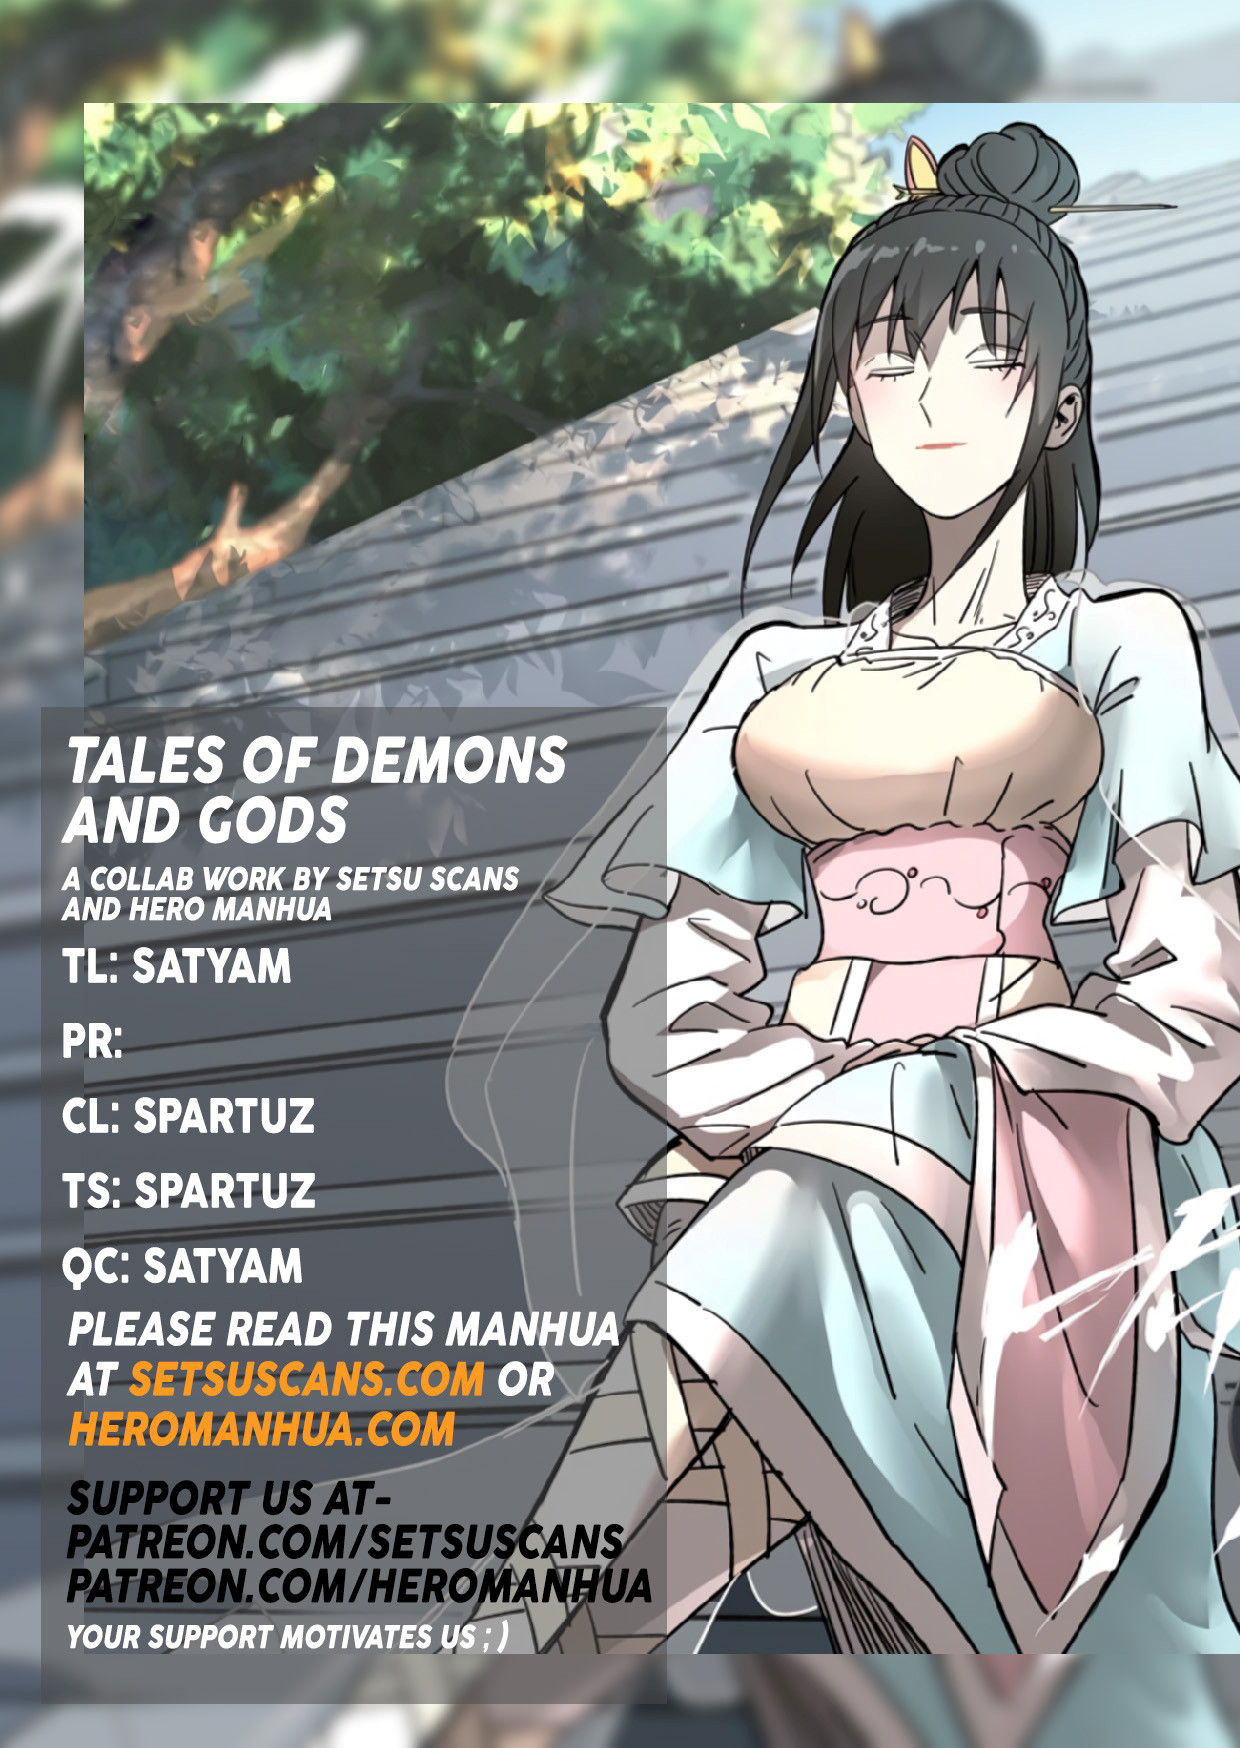 Tales of Demons and Gods - Chapter 10734 - The exchange meeting is not over yet (1) - Image 1